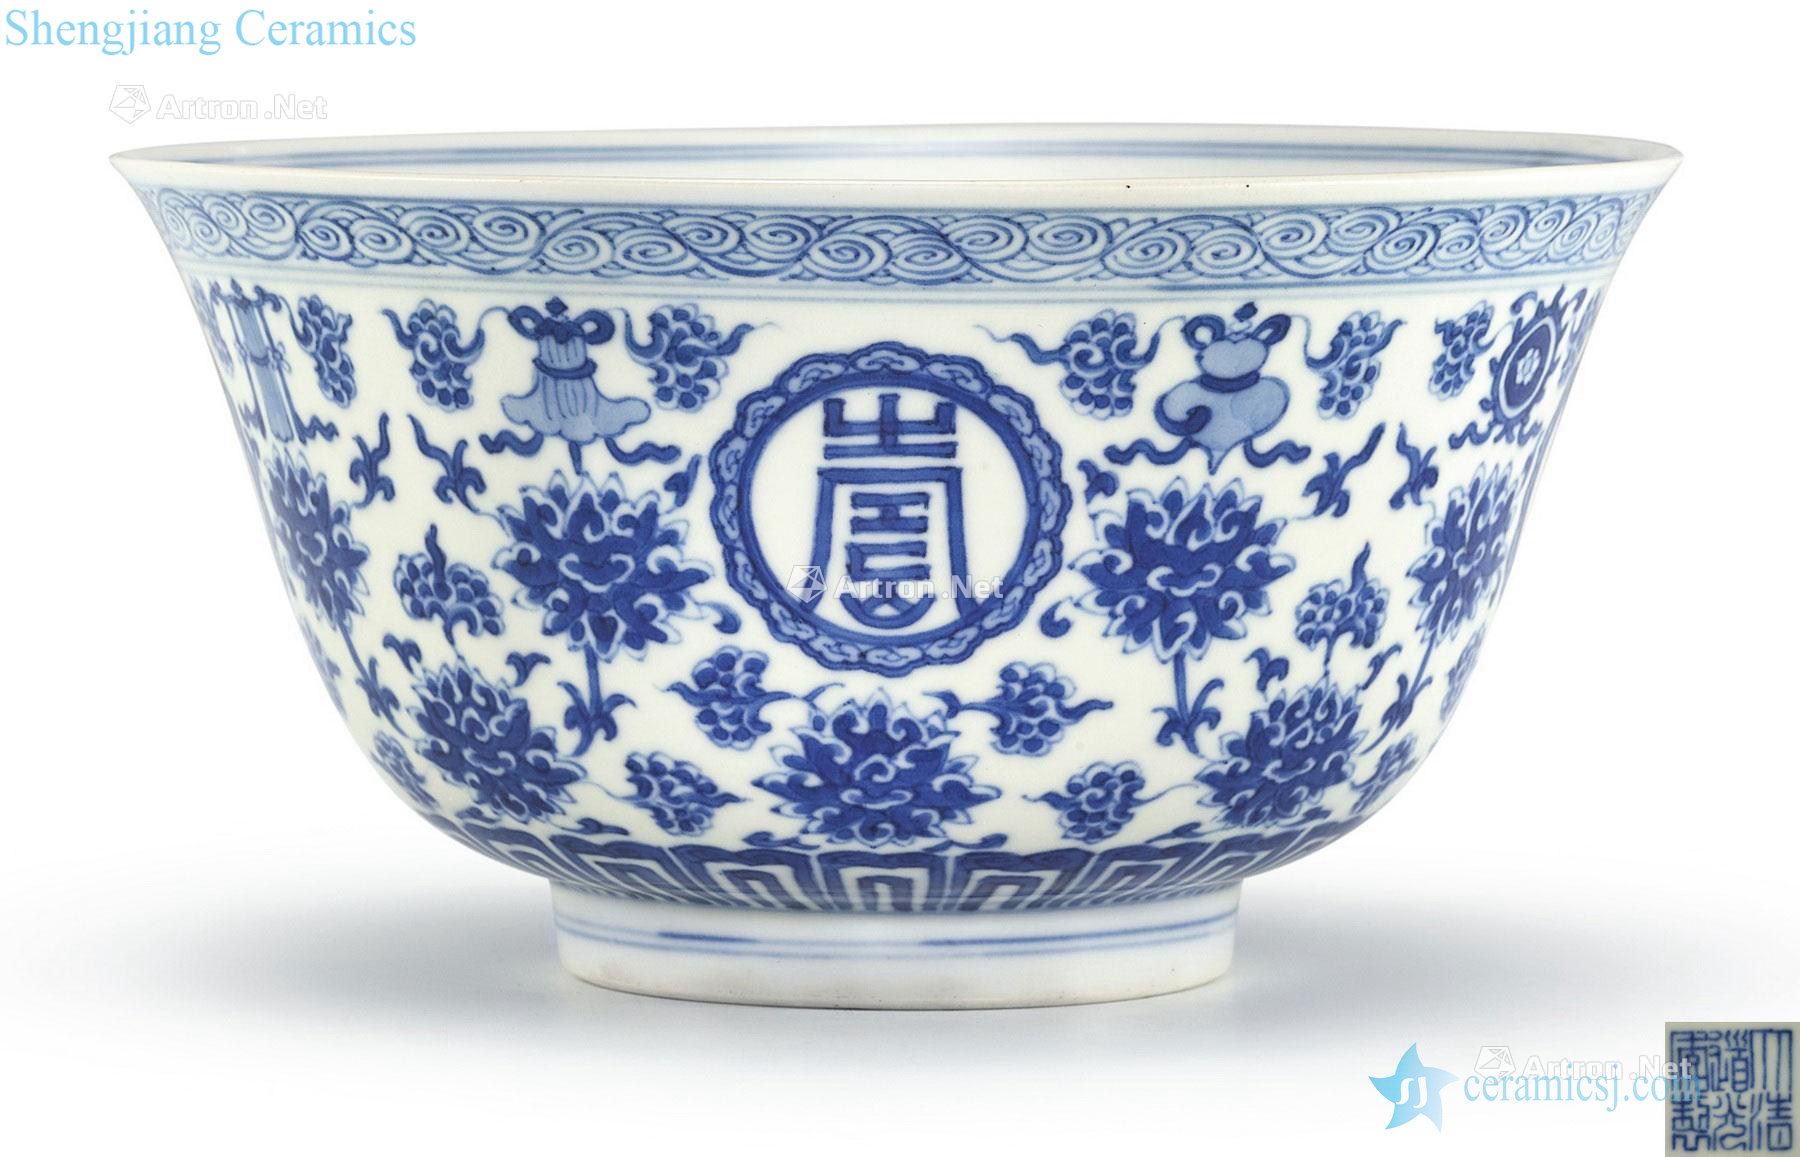 Qing daoguang Blue and white stays in grain 盌